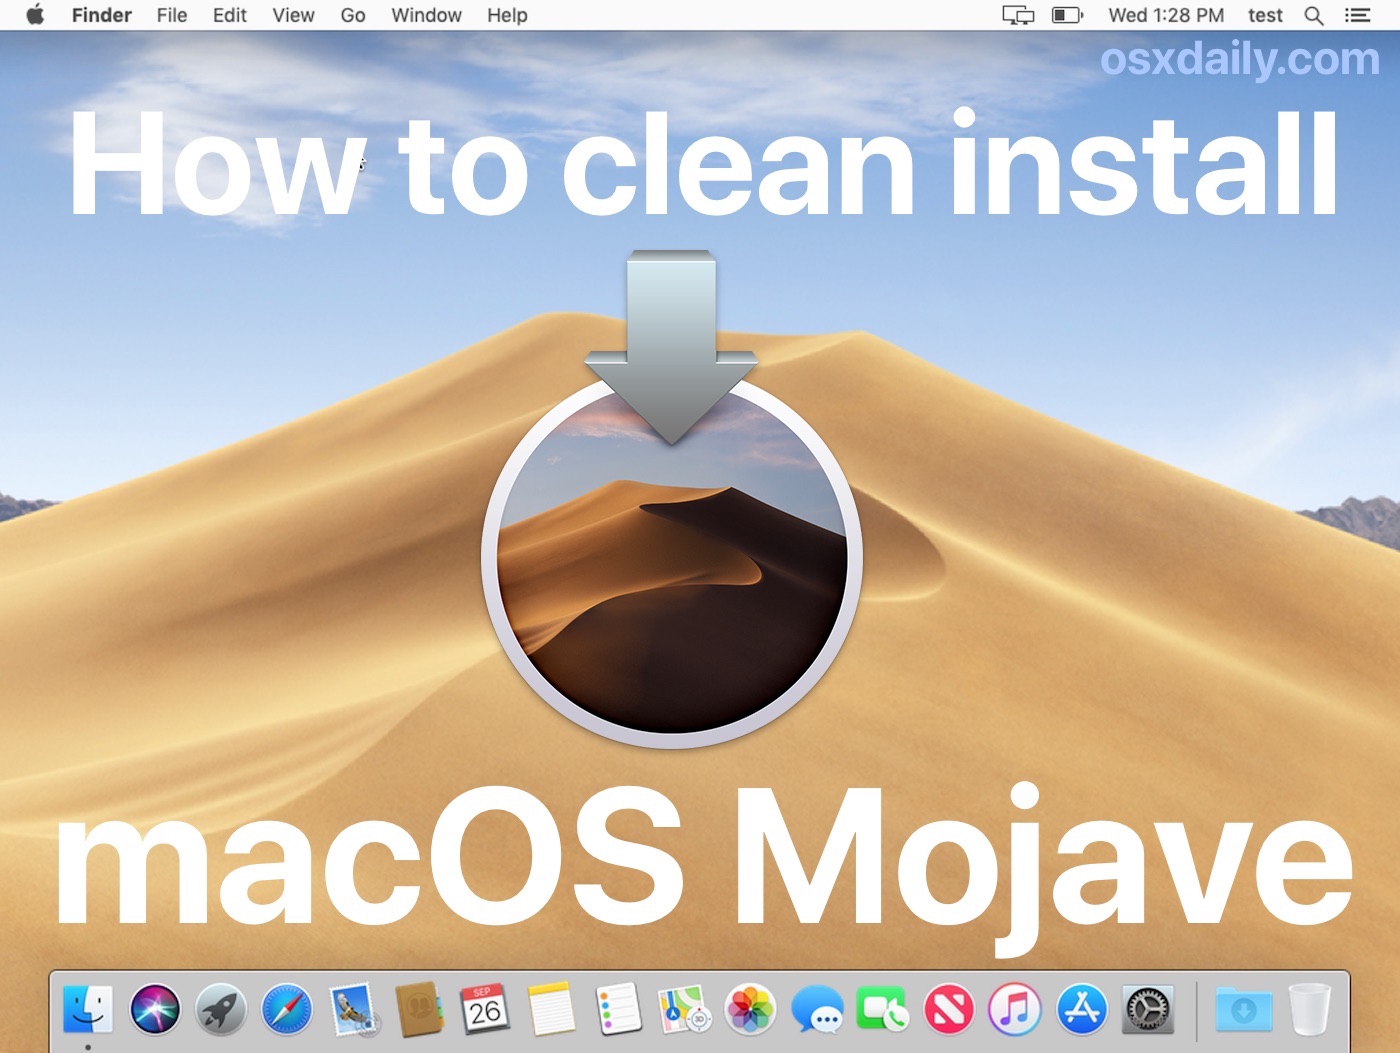 best app for mac cleaning 2018